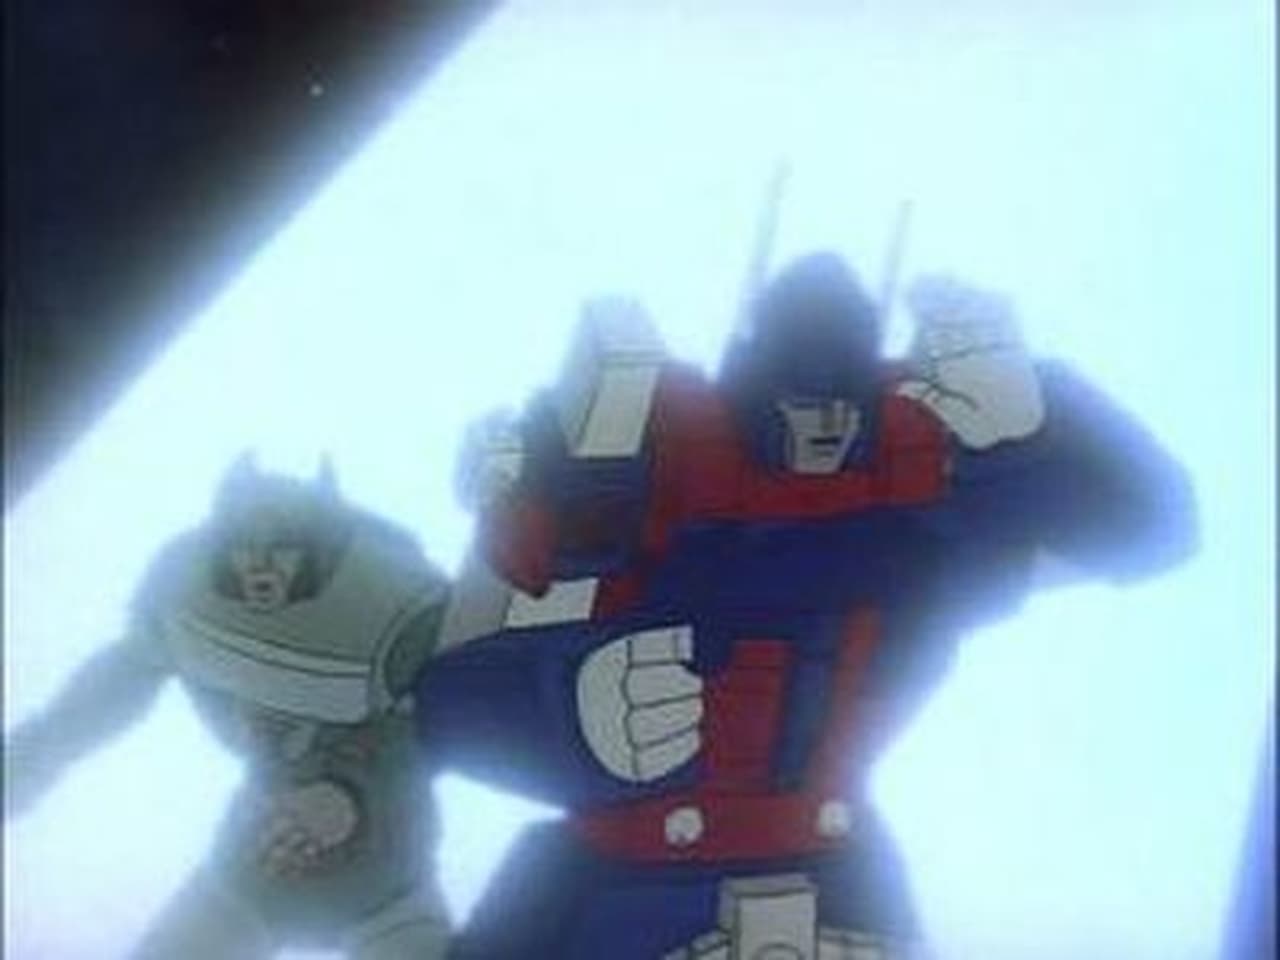 The Transformers - Season 3 Episode 3 : The Five Faces of Darkness (3)